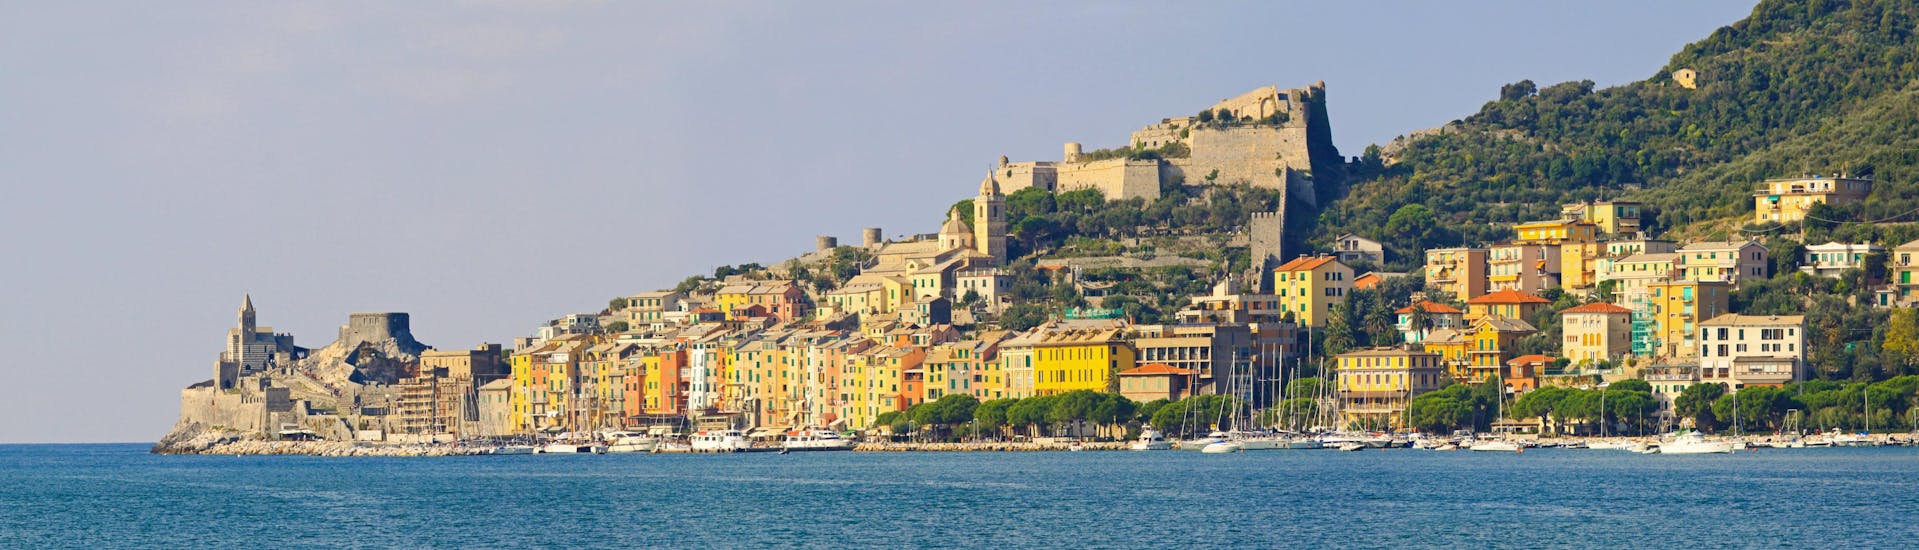 View of the pier of Porto Venere, Italy, a popular destination for boat trips.